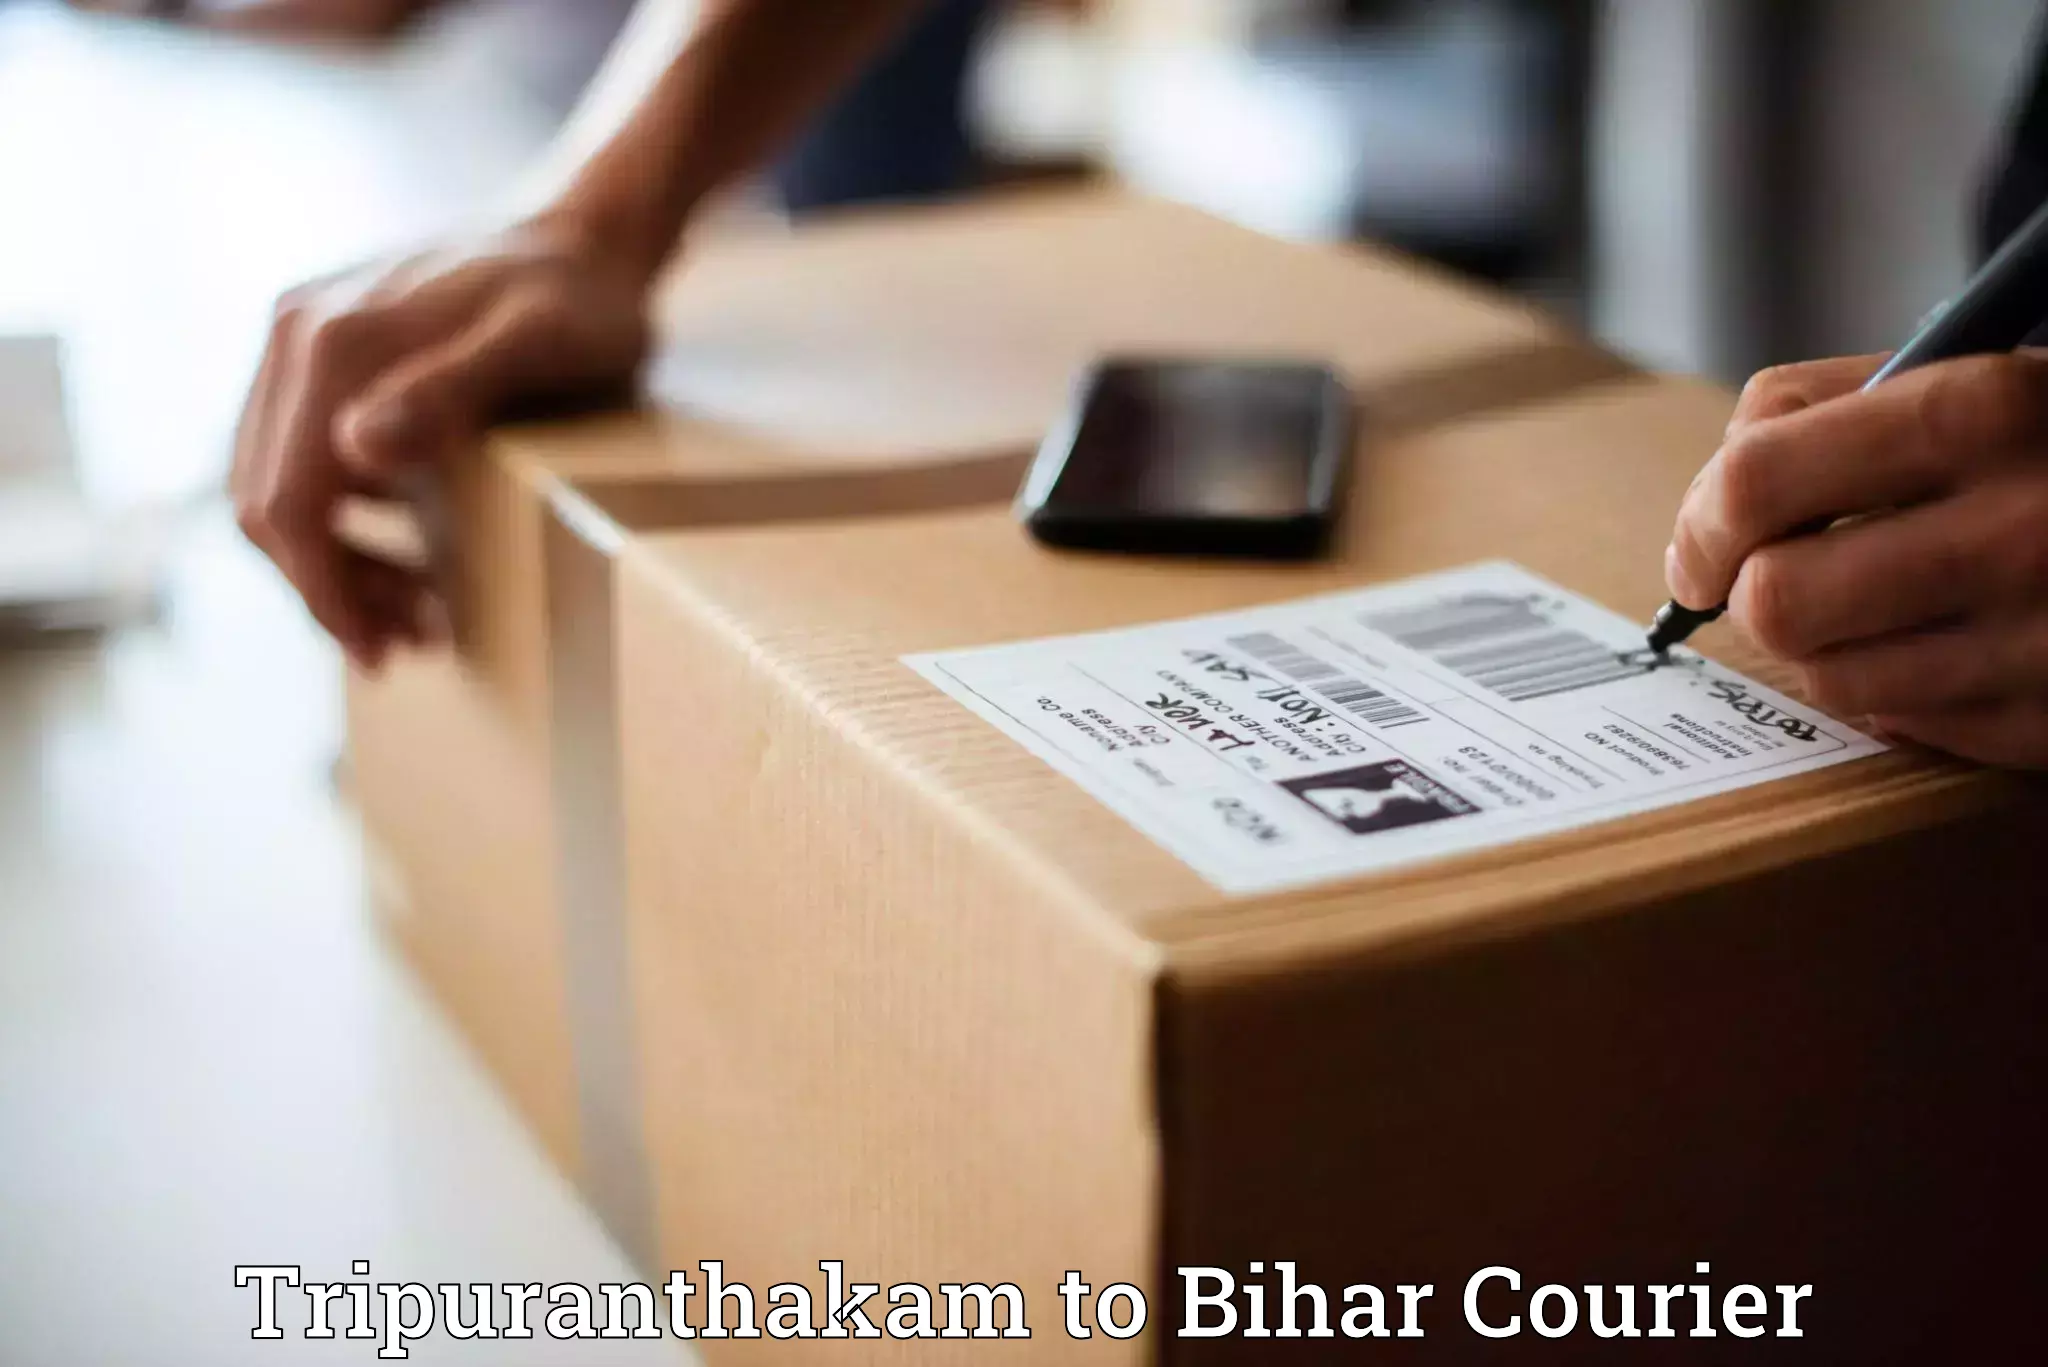 Parcel delivery in Tripuranthakam to Madhubani